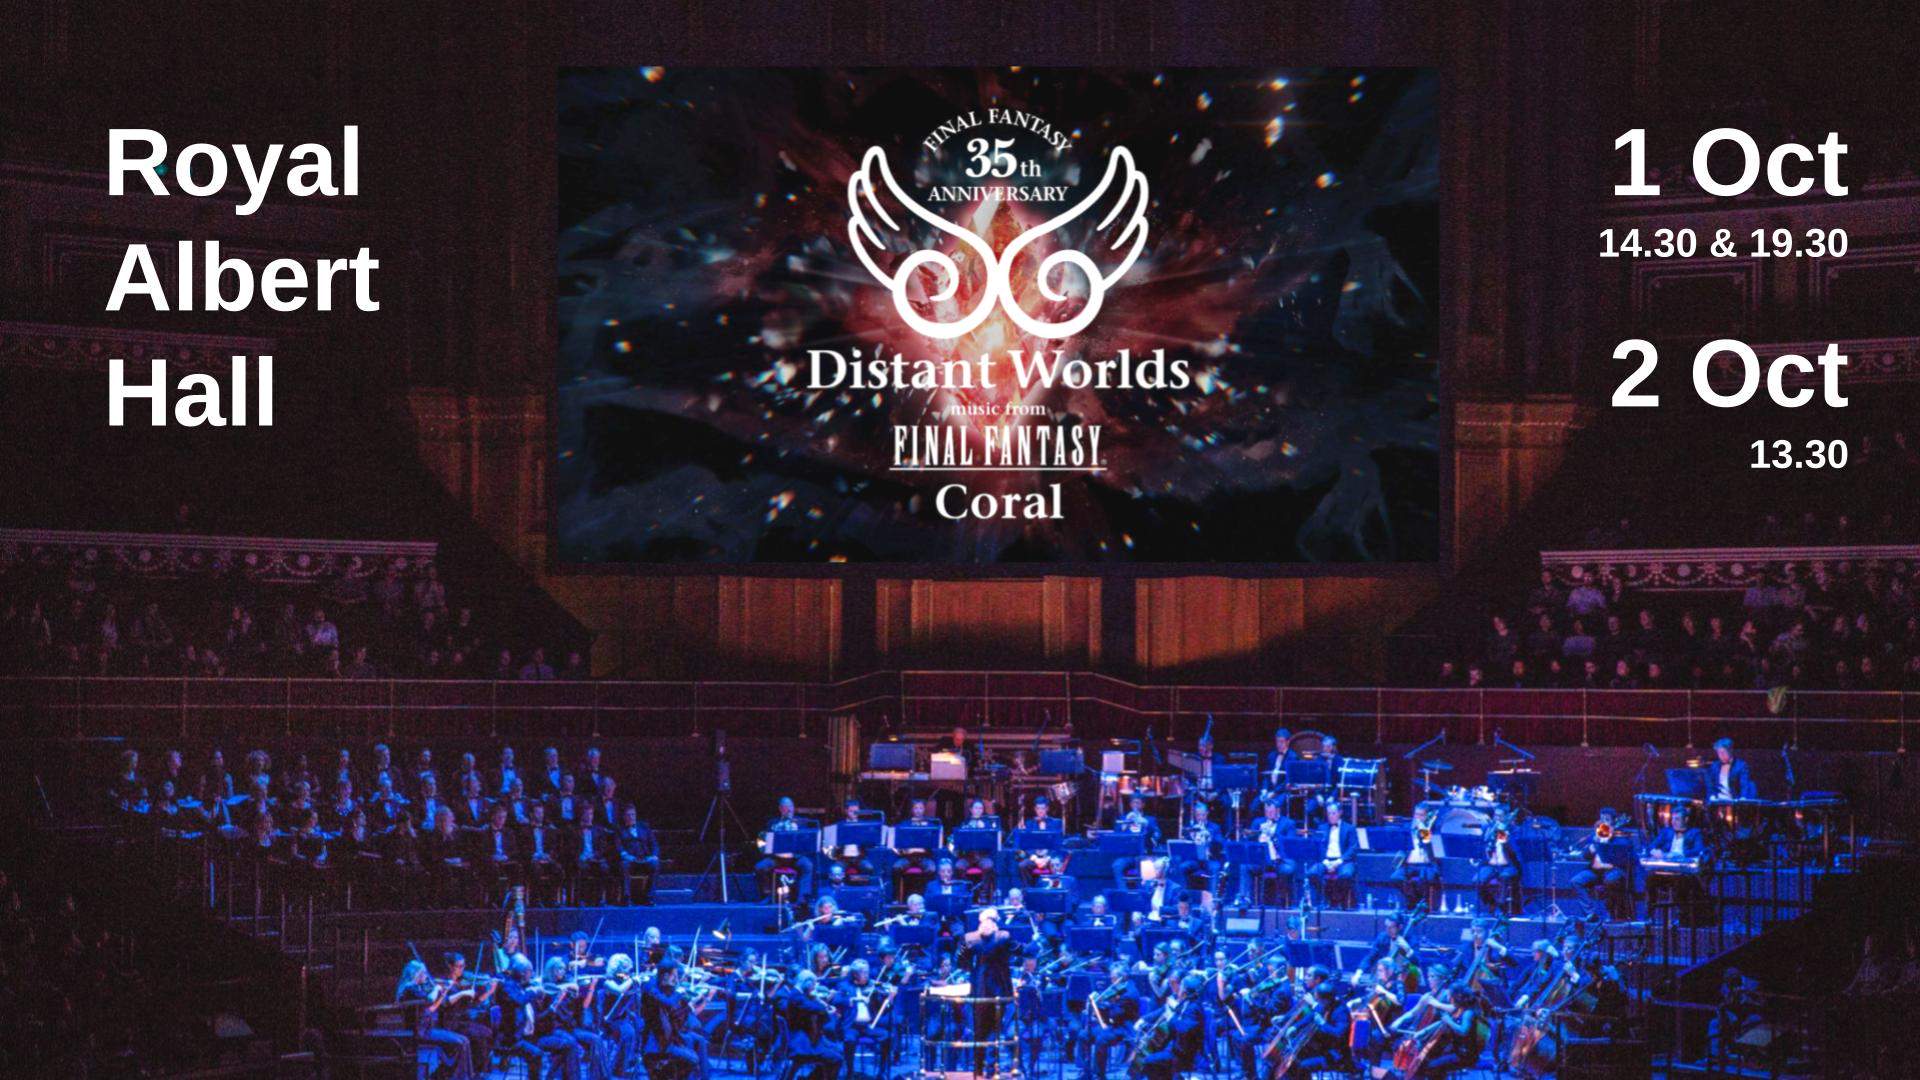 Orchestra image with the Distant Worlds text logo